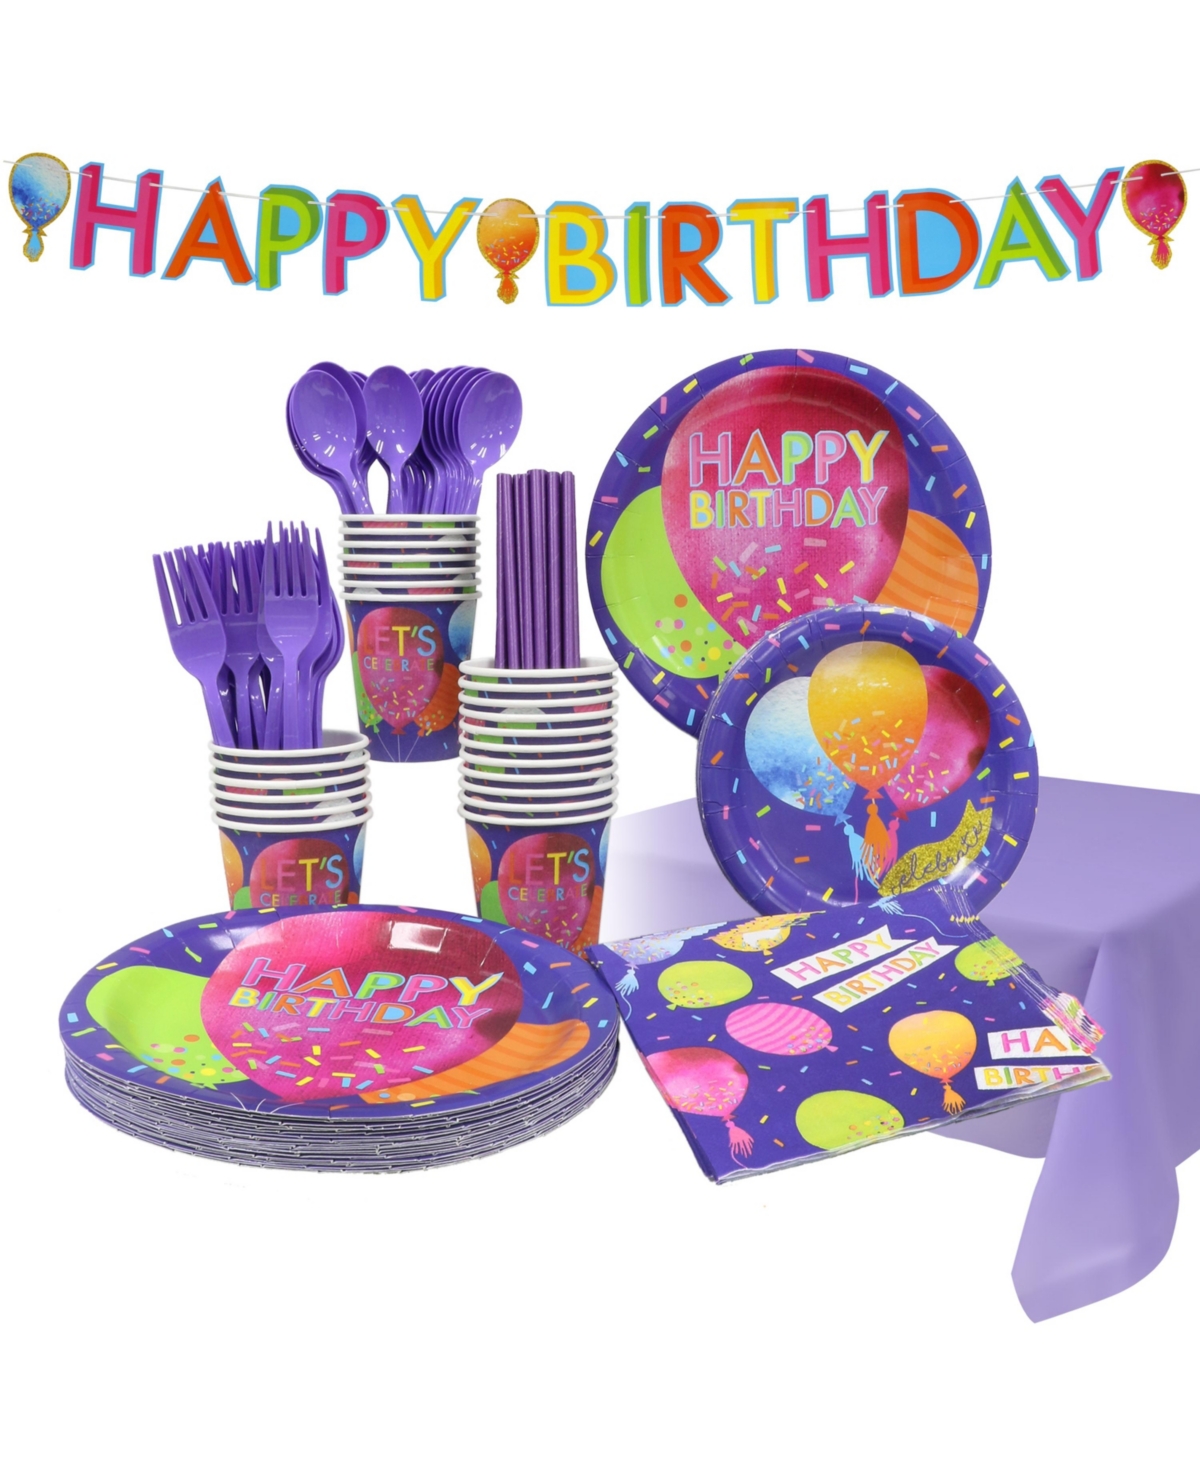 Puleo Disposable Birthday Party Set, Serves 24, With Large And Small Paper Plates, Paper Cups, Straws, Nap In Purple